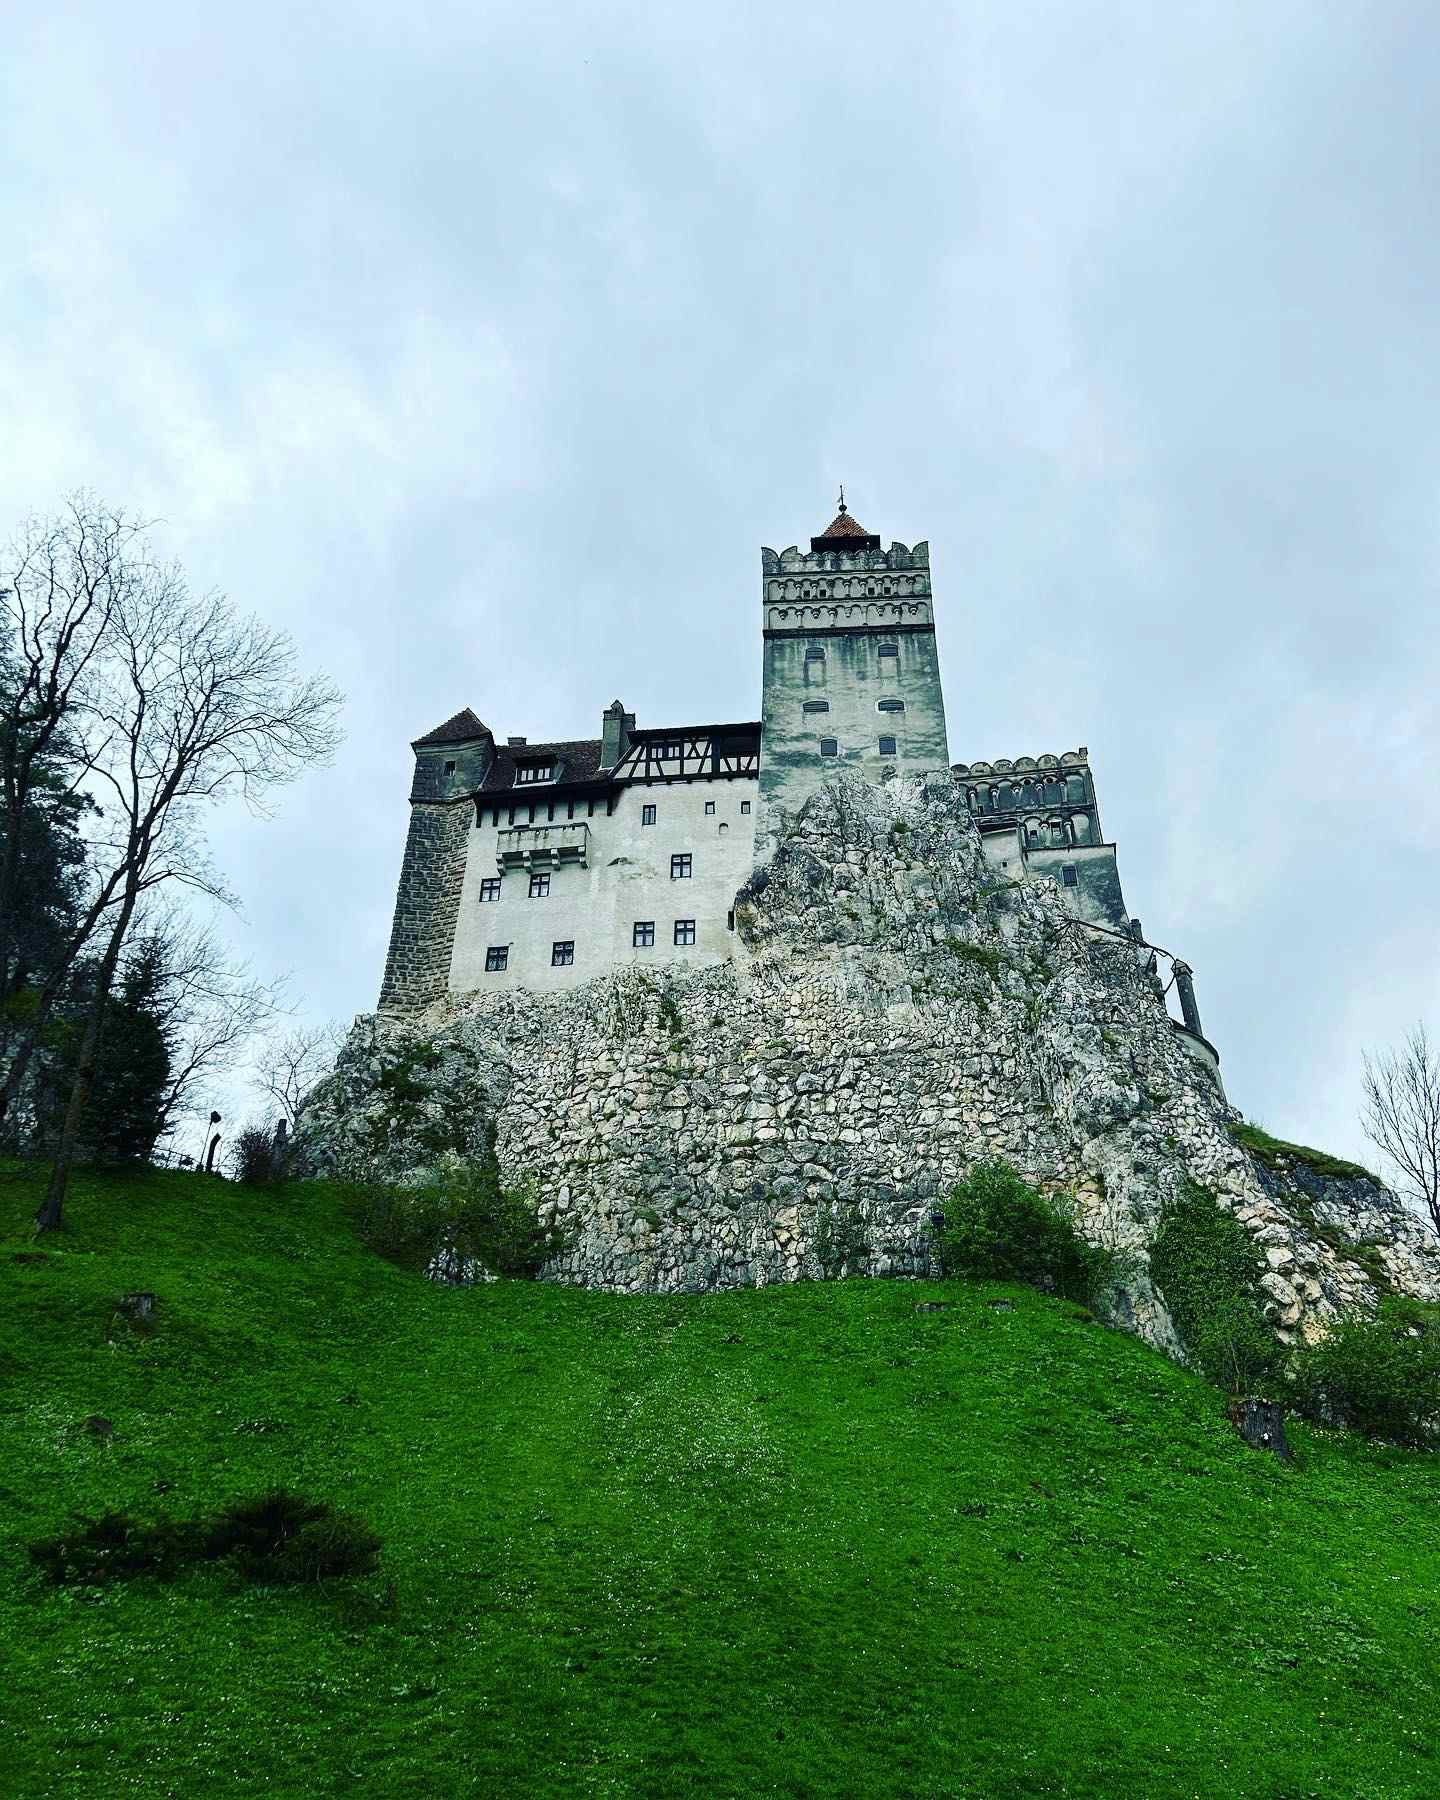 Bear Watching and Castle Hopping in Romania | Much Better Adventures